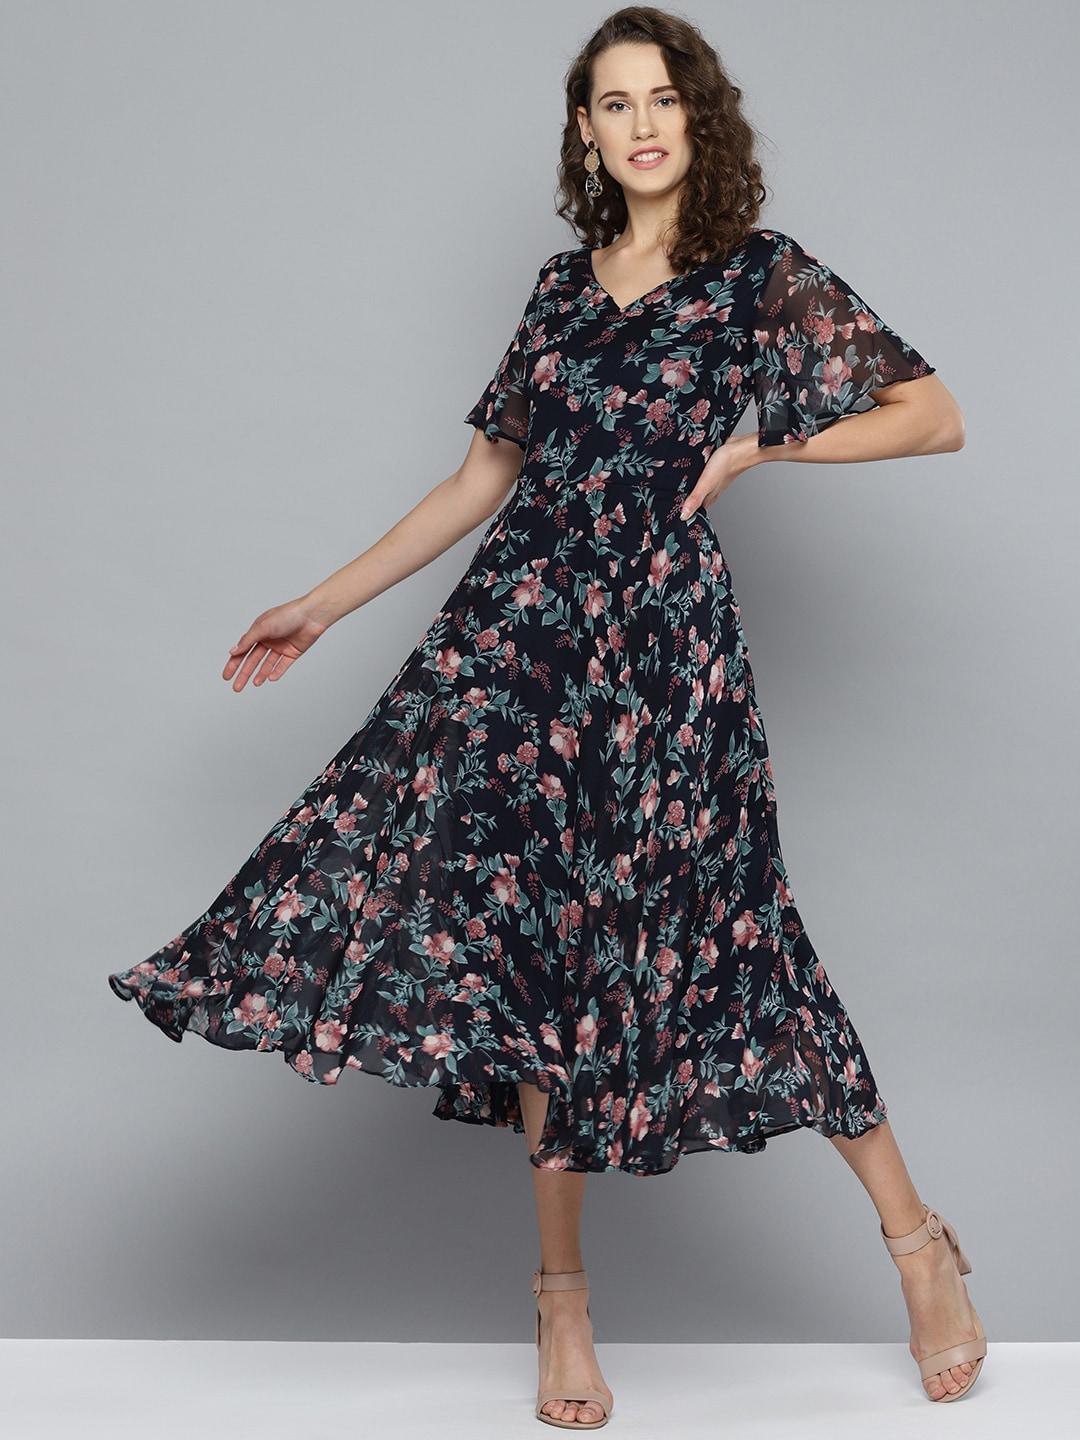 rare-navy-blue-&-pink-floral-printed-fit-and-flare-dress